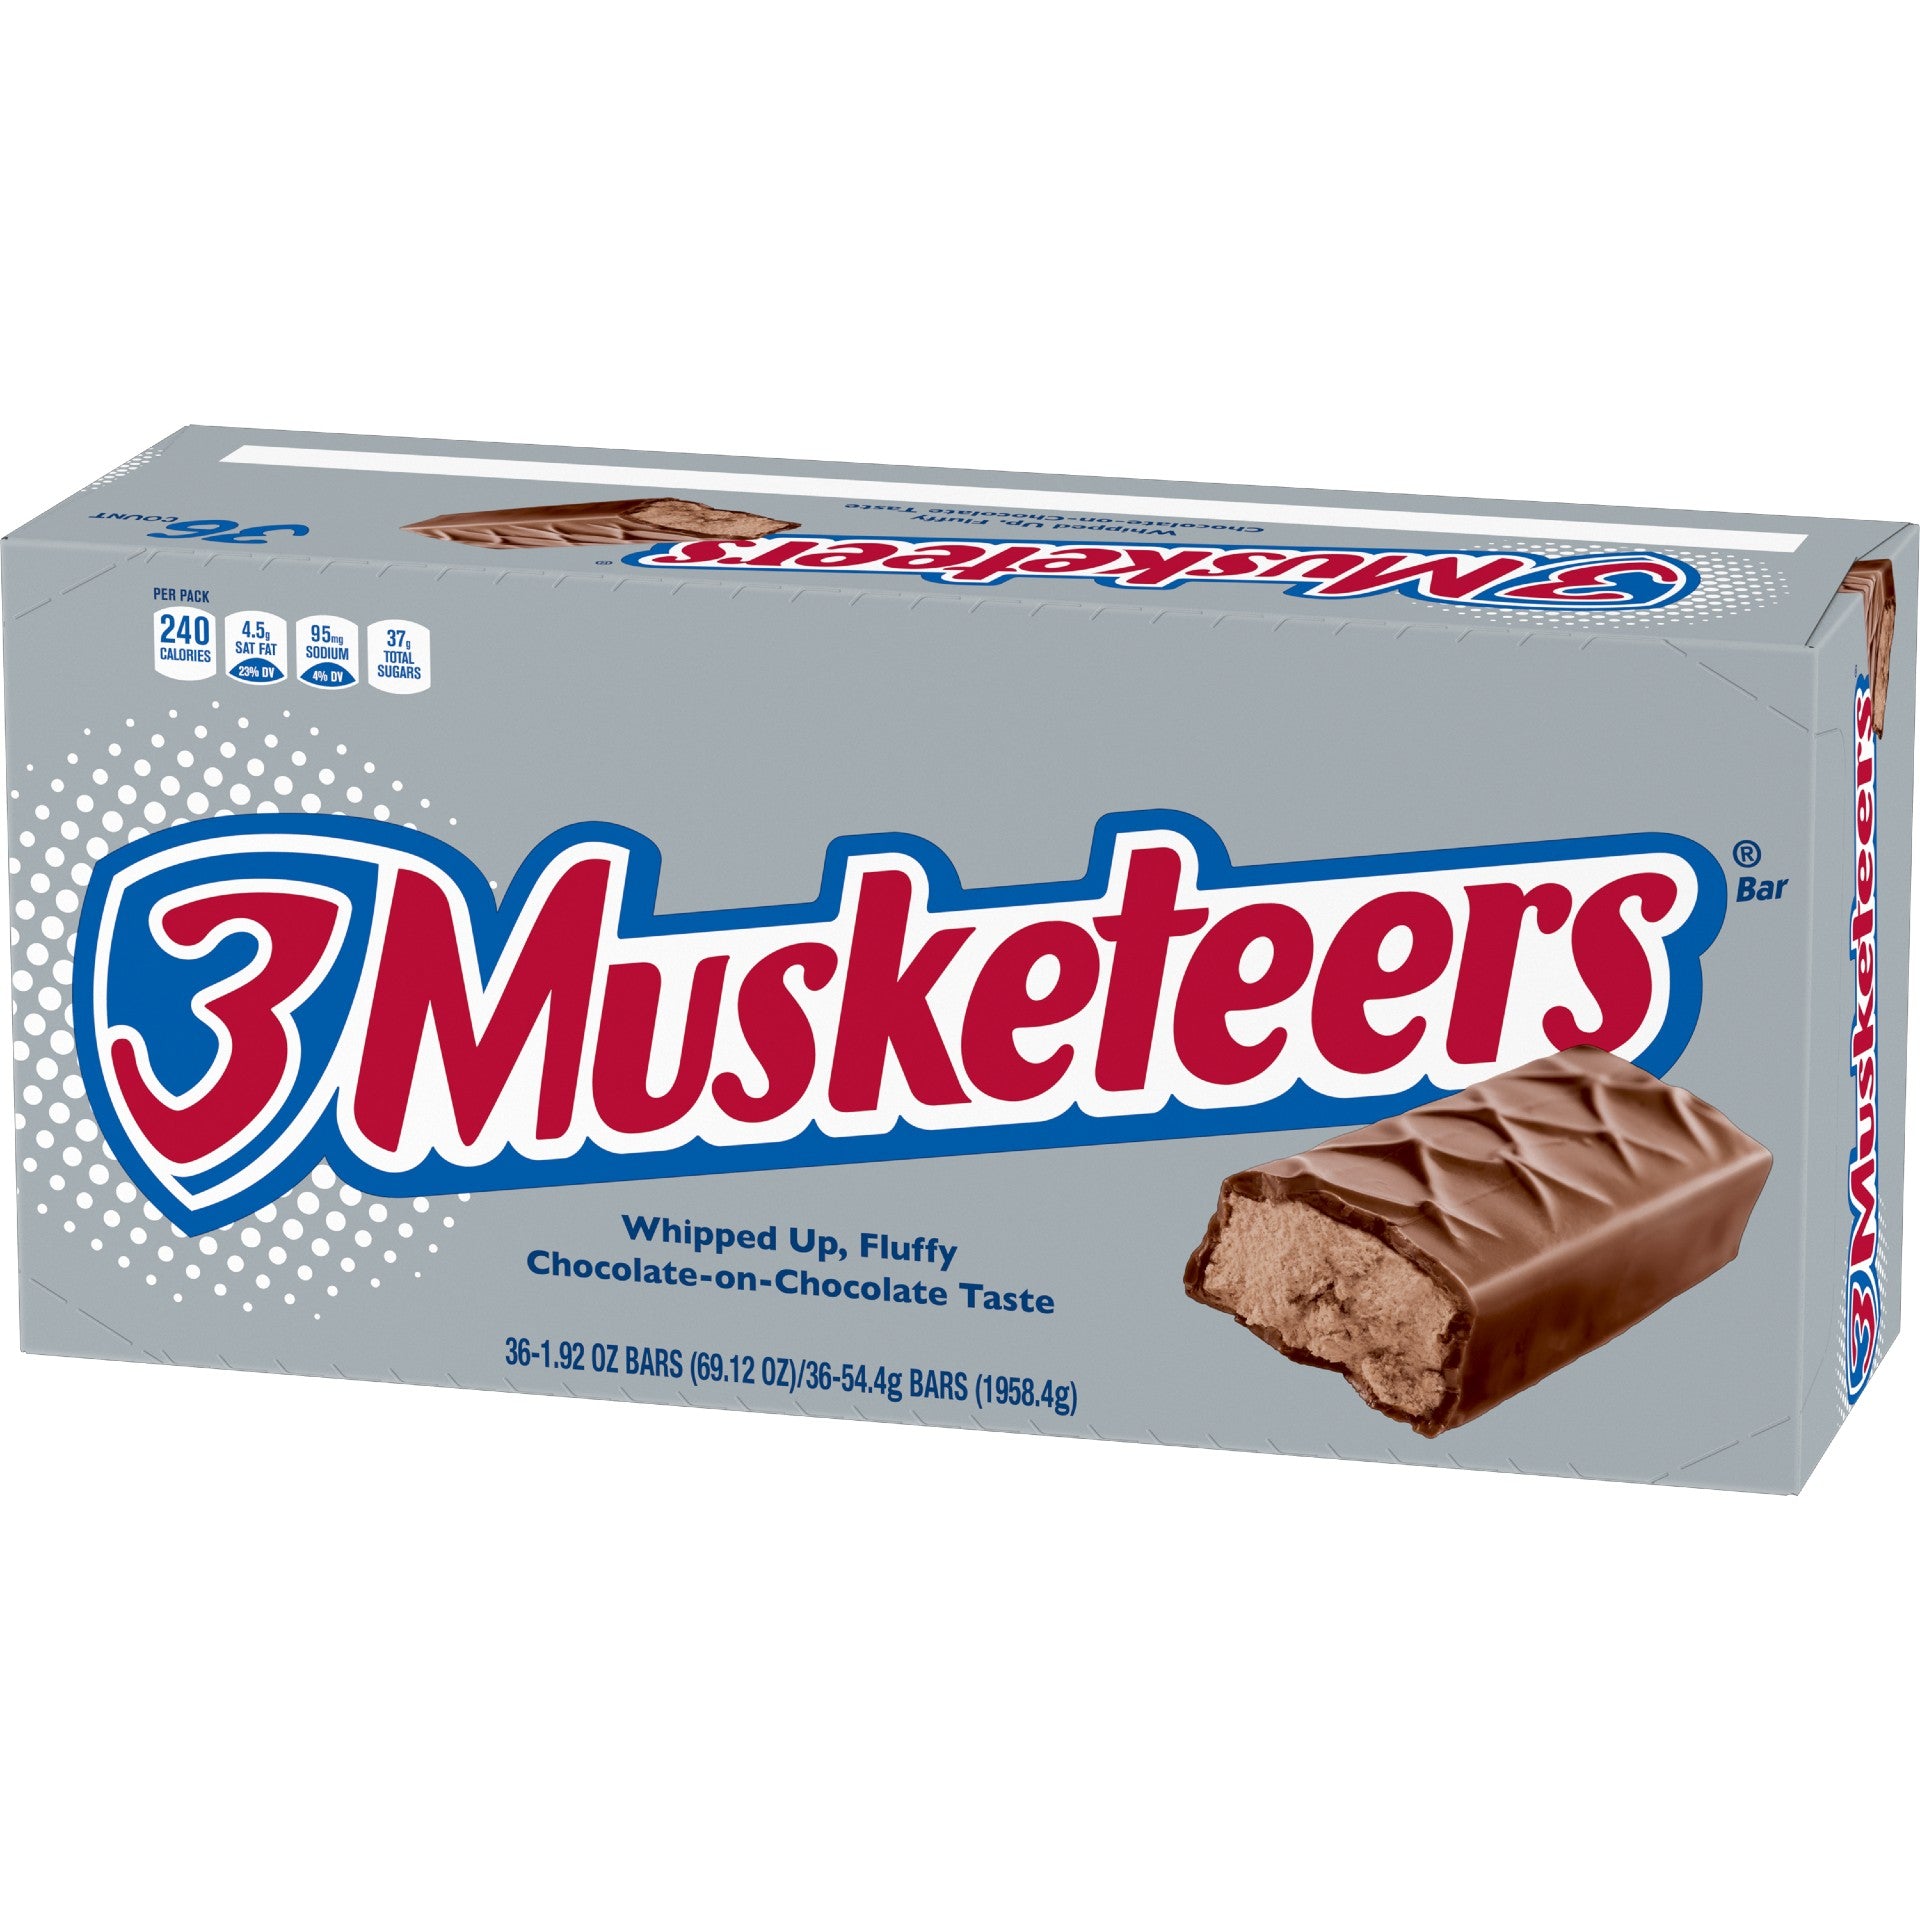 3 Musketeers Candy Bar 1.92 oz.